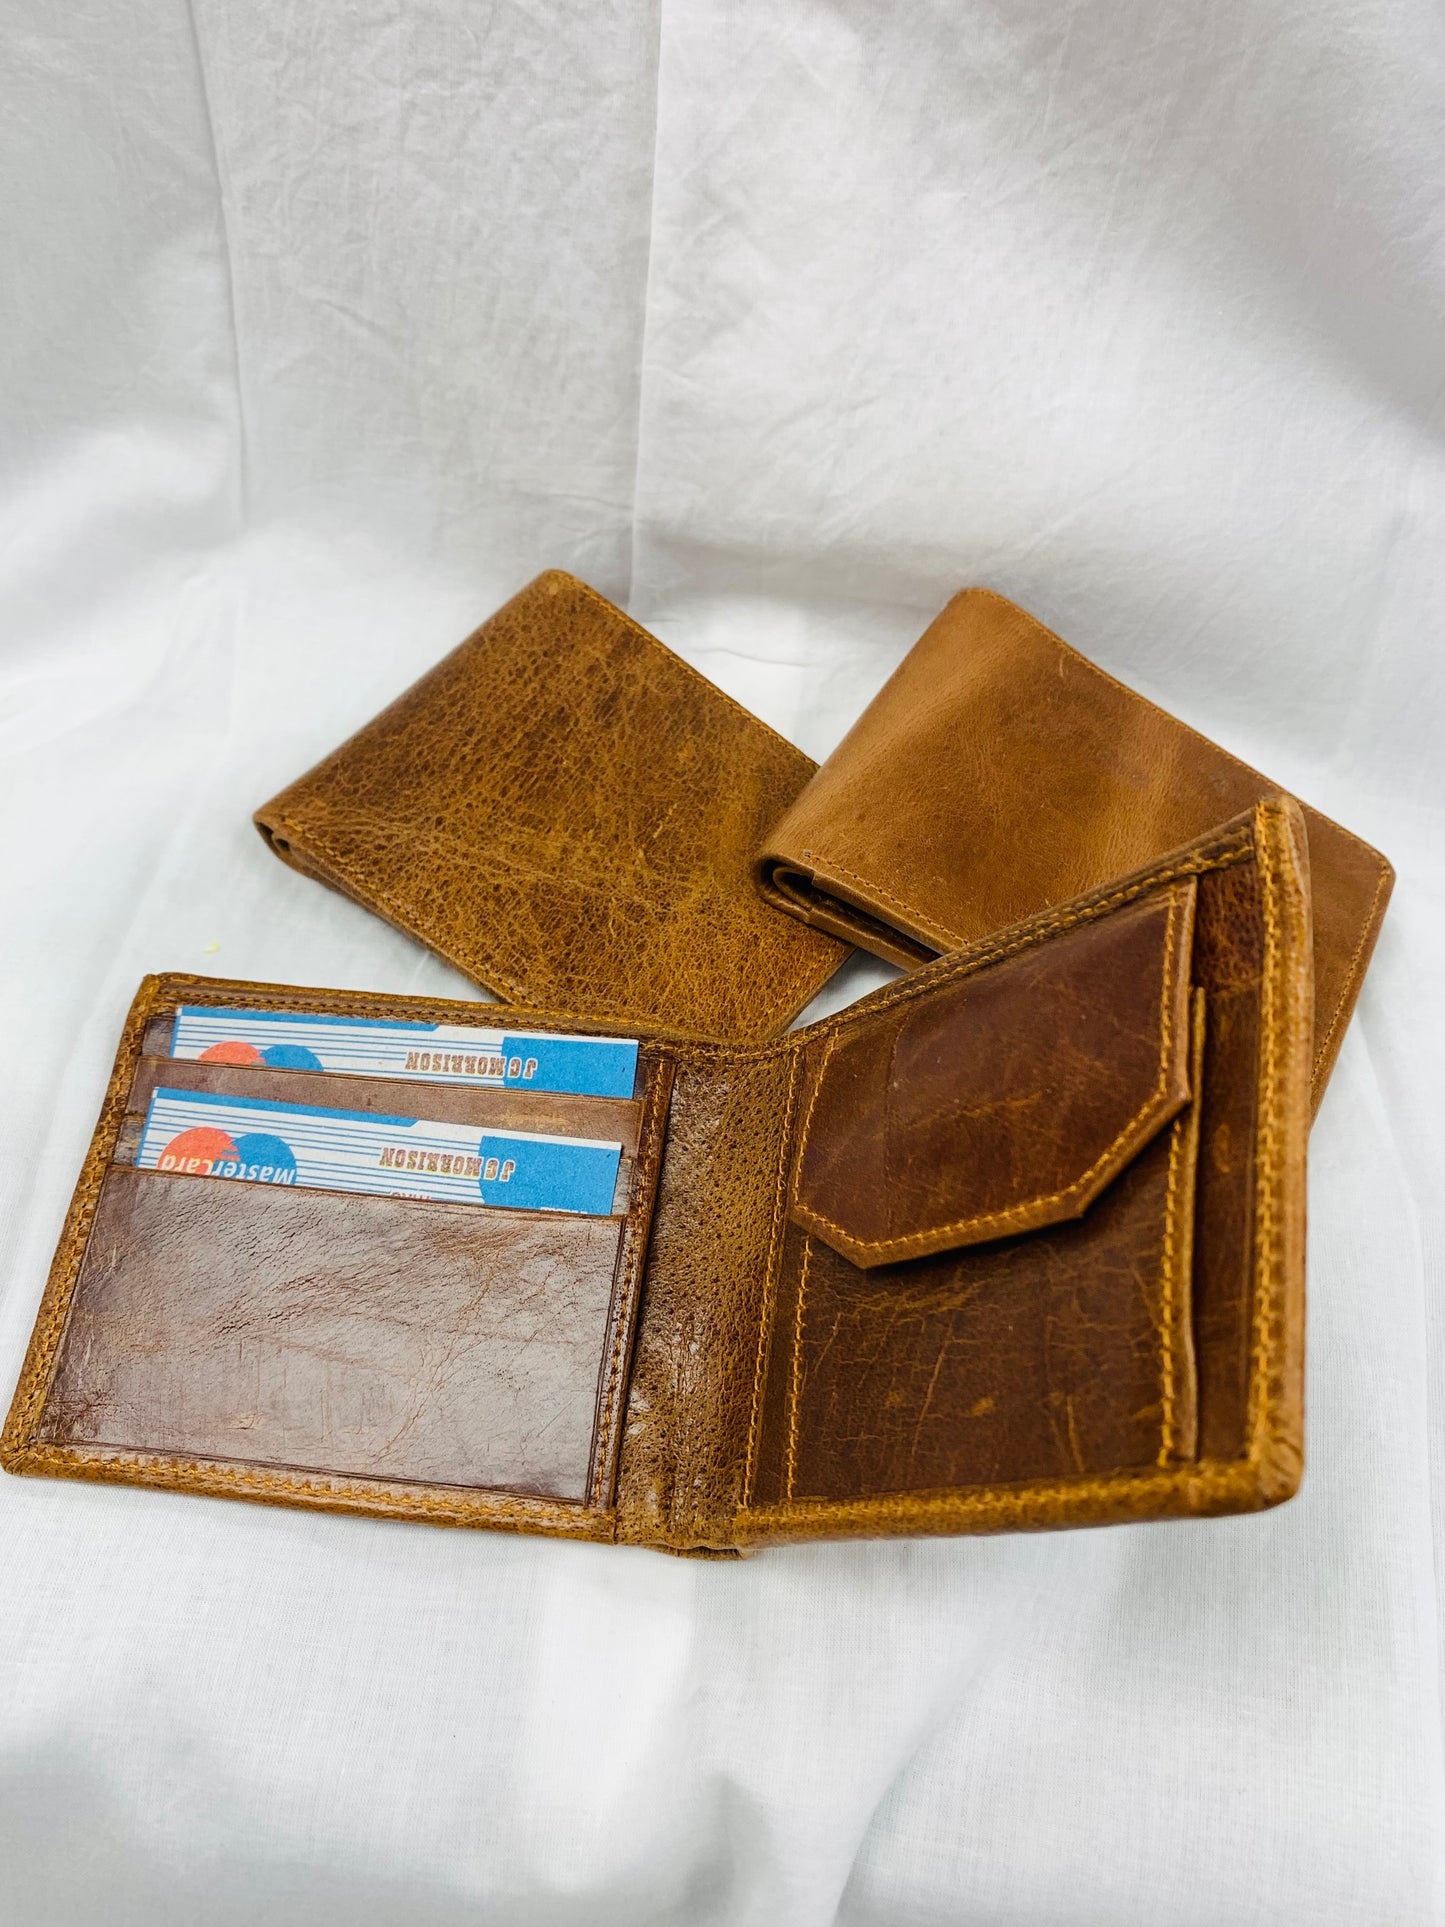 BOHEMIAN STYLE HANDCRAFTED GENUINE LEATHER MENS WALLET # 63550